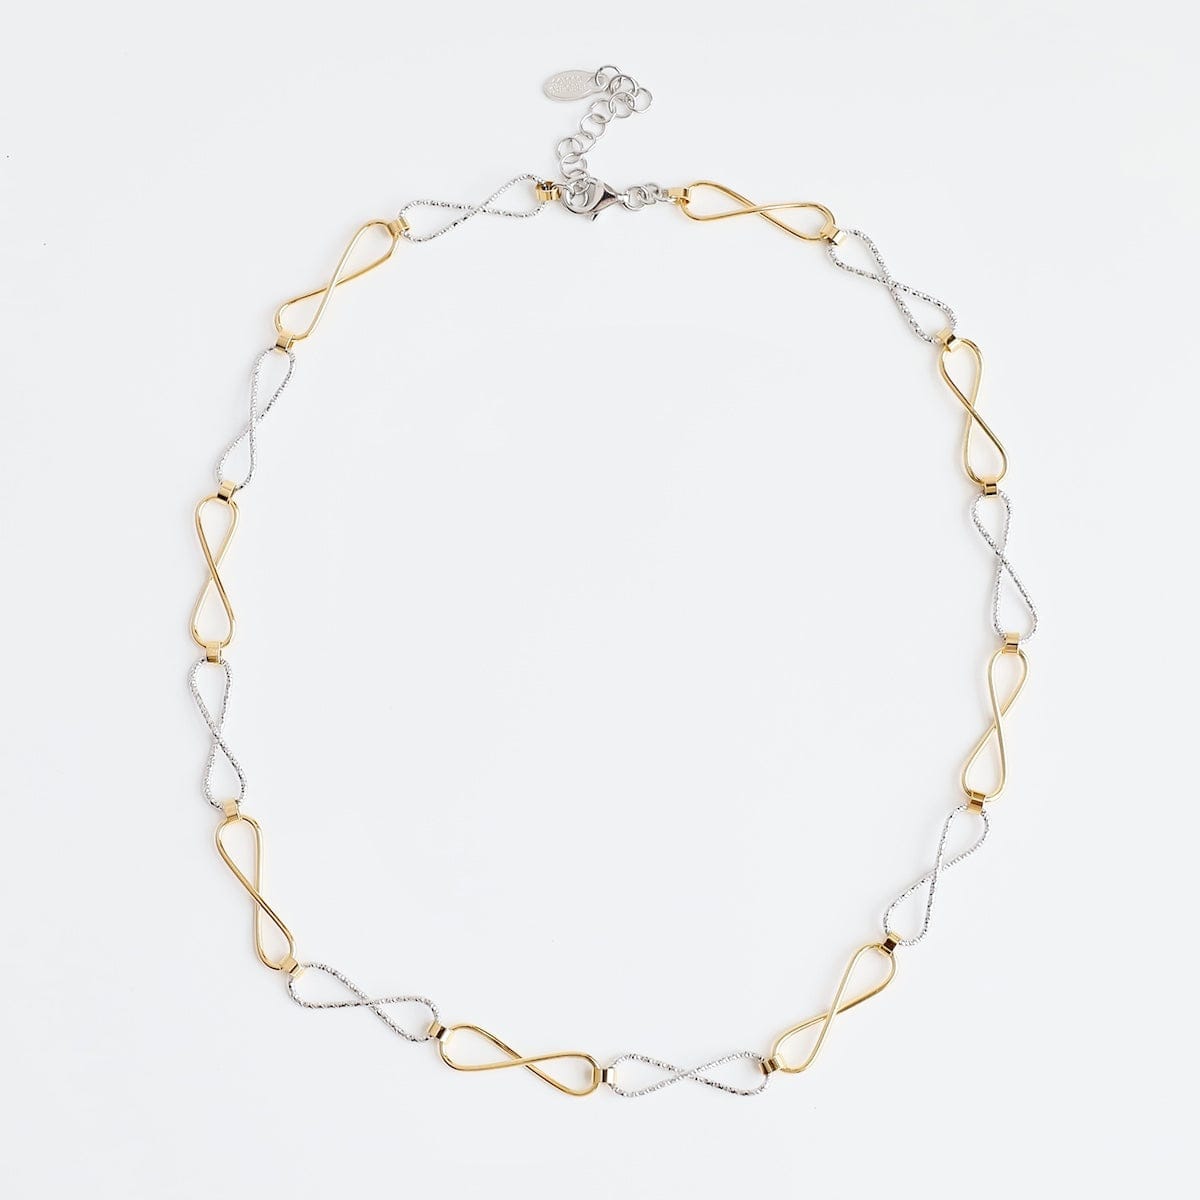 NKL-GPL Sterling Silver & Yellow Gold Plated Elongated Inf